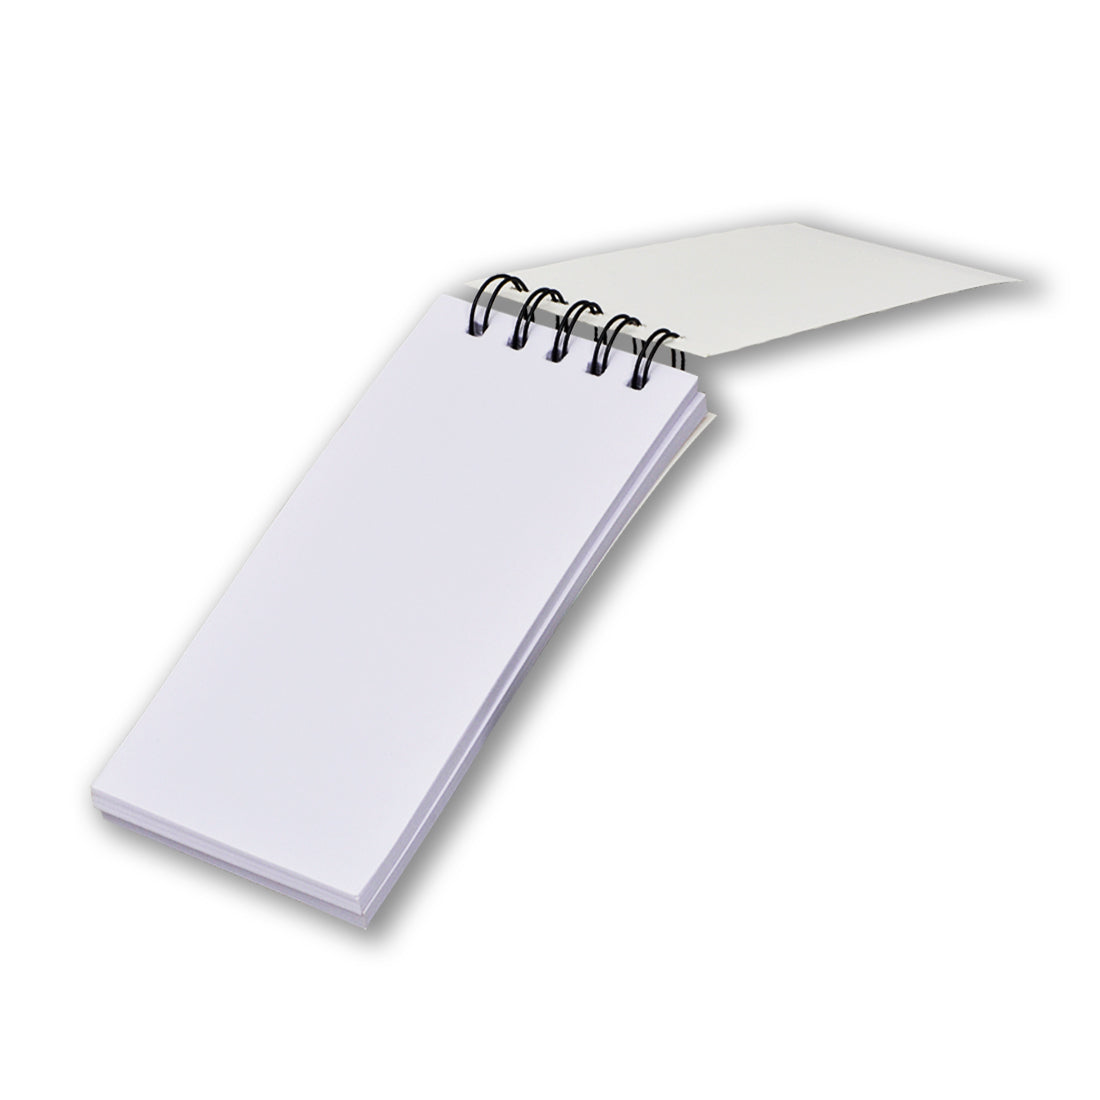 Daily Undated Notepad with Spiral Binding Plain Paged (Set of 6) Tear off Sheets Memo Notebook.